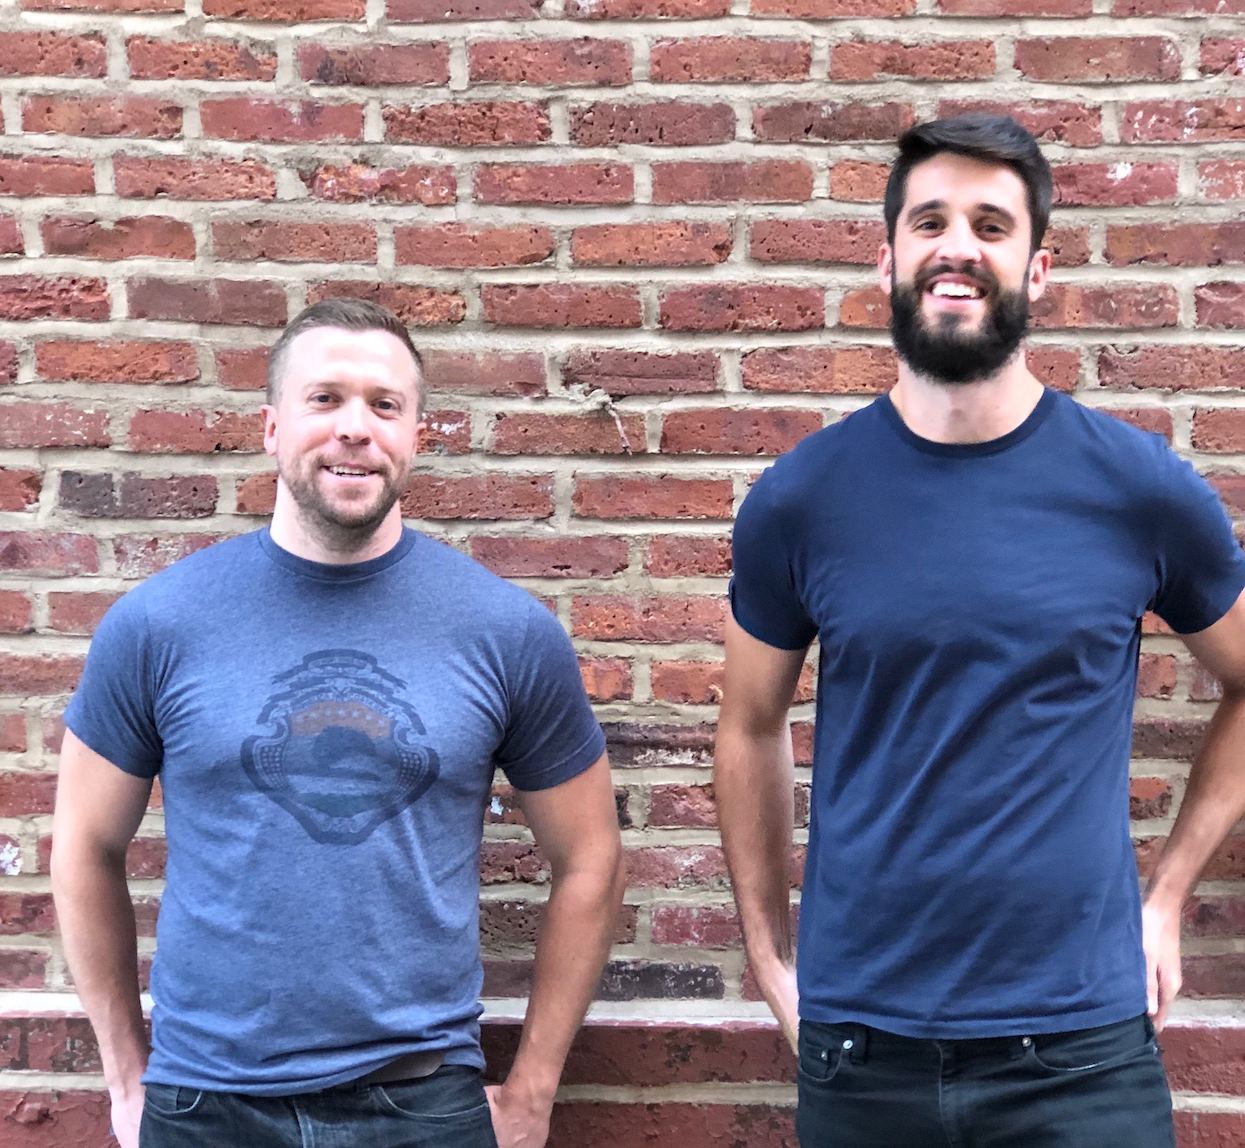 NYC-based Vitally raised $9M Series A from Andreessen Horowitz